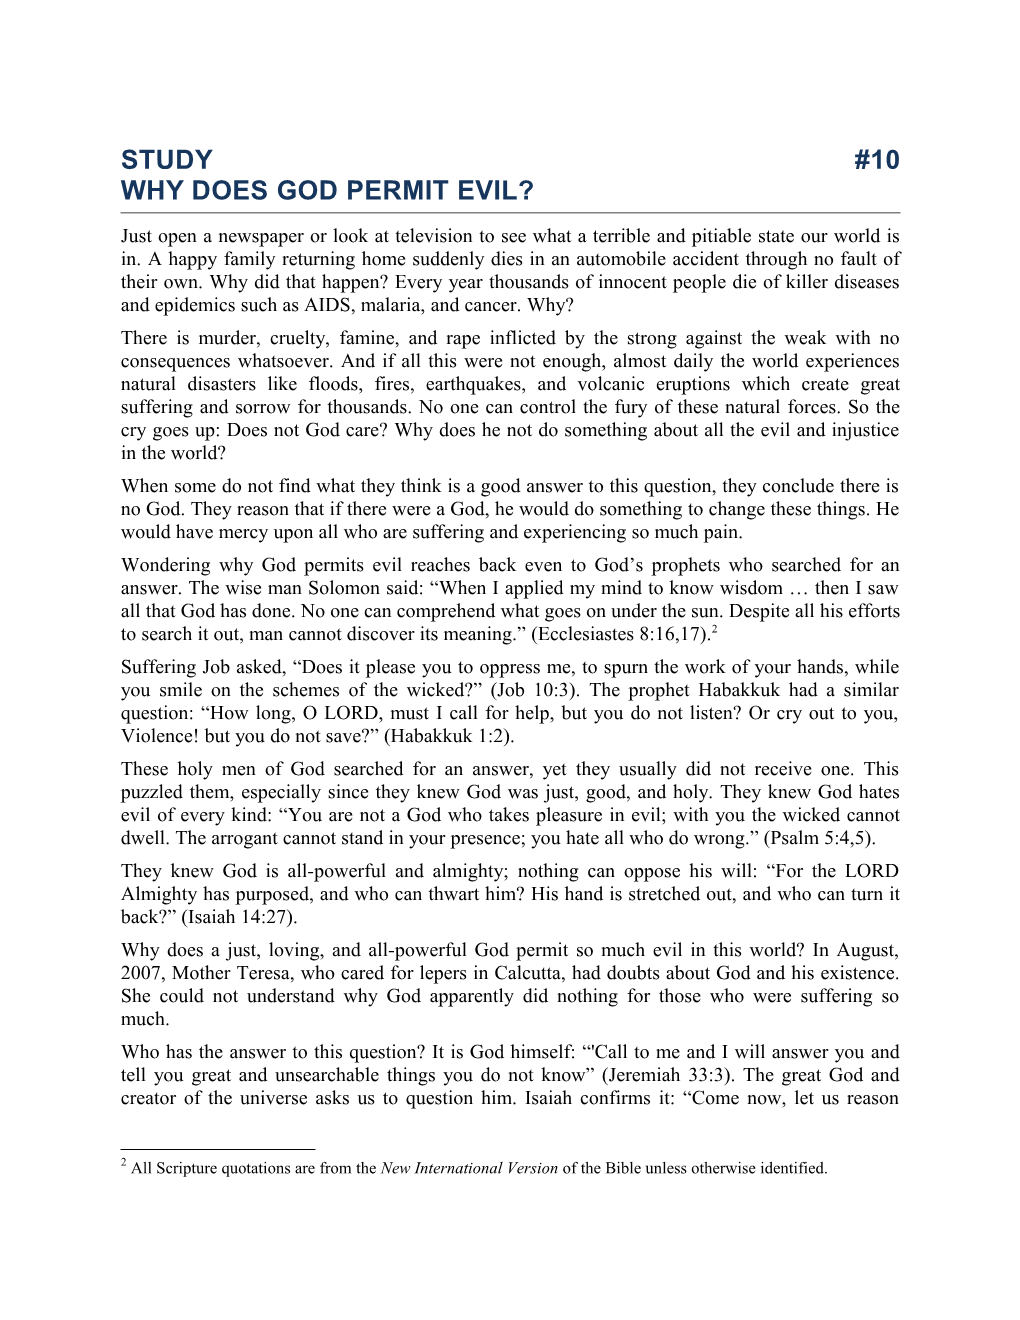 Study#10 Why Does God Permit Evil?